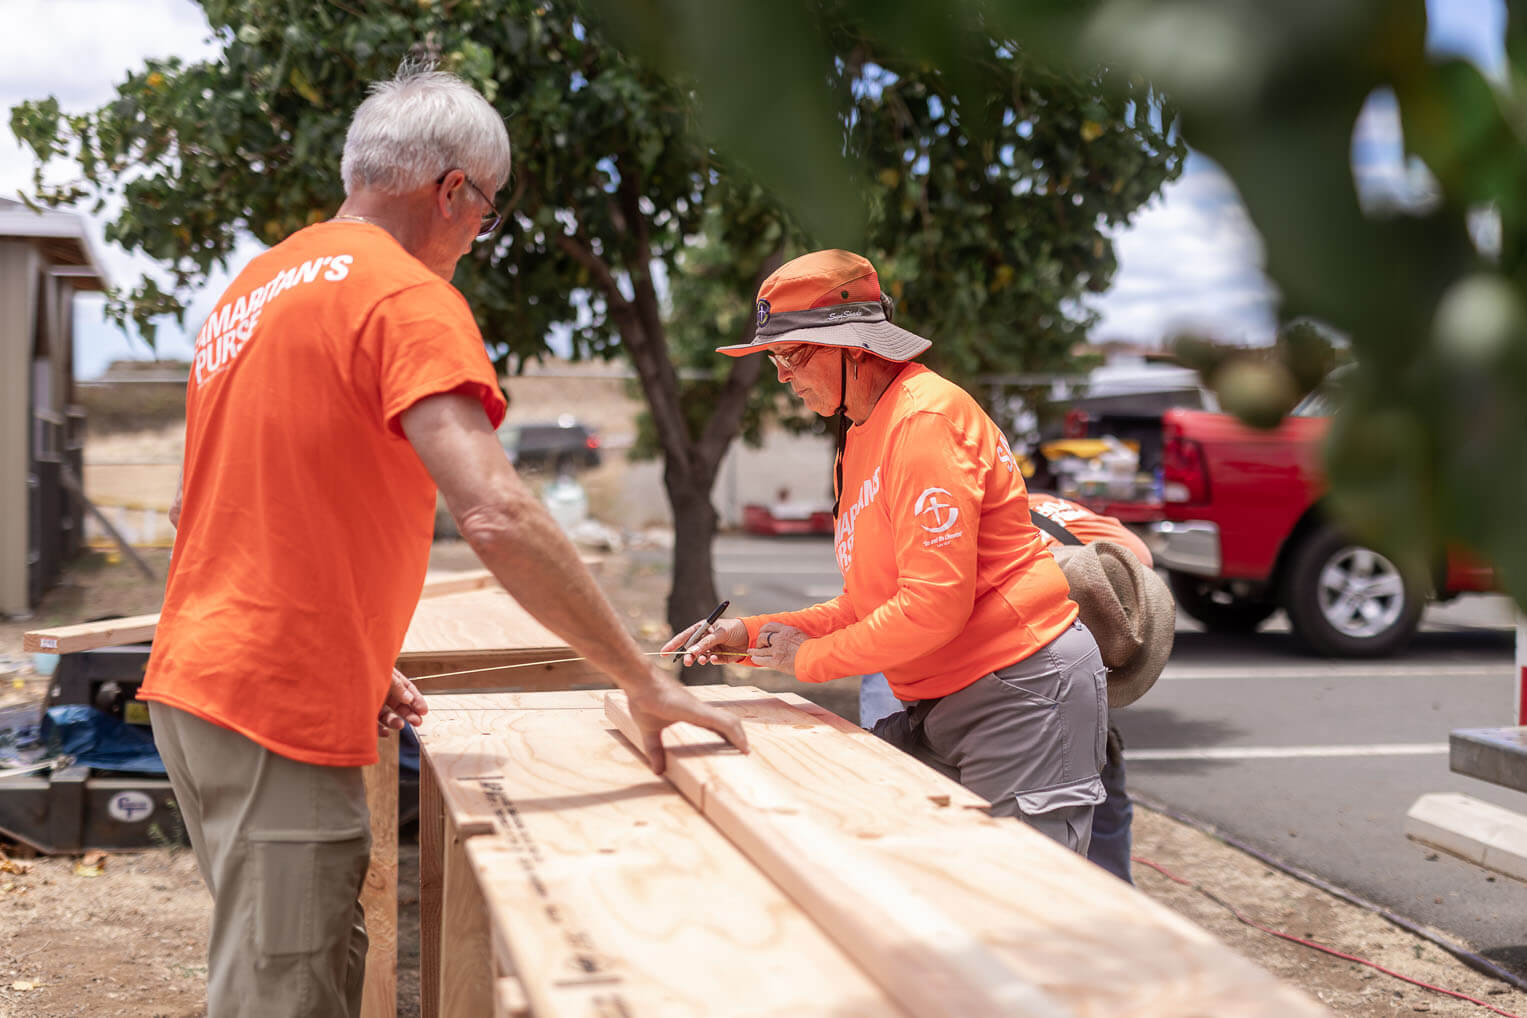 Samaritan's Purse volunteer teams are readying supplies and materials as we prepare to help homeowners.